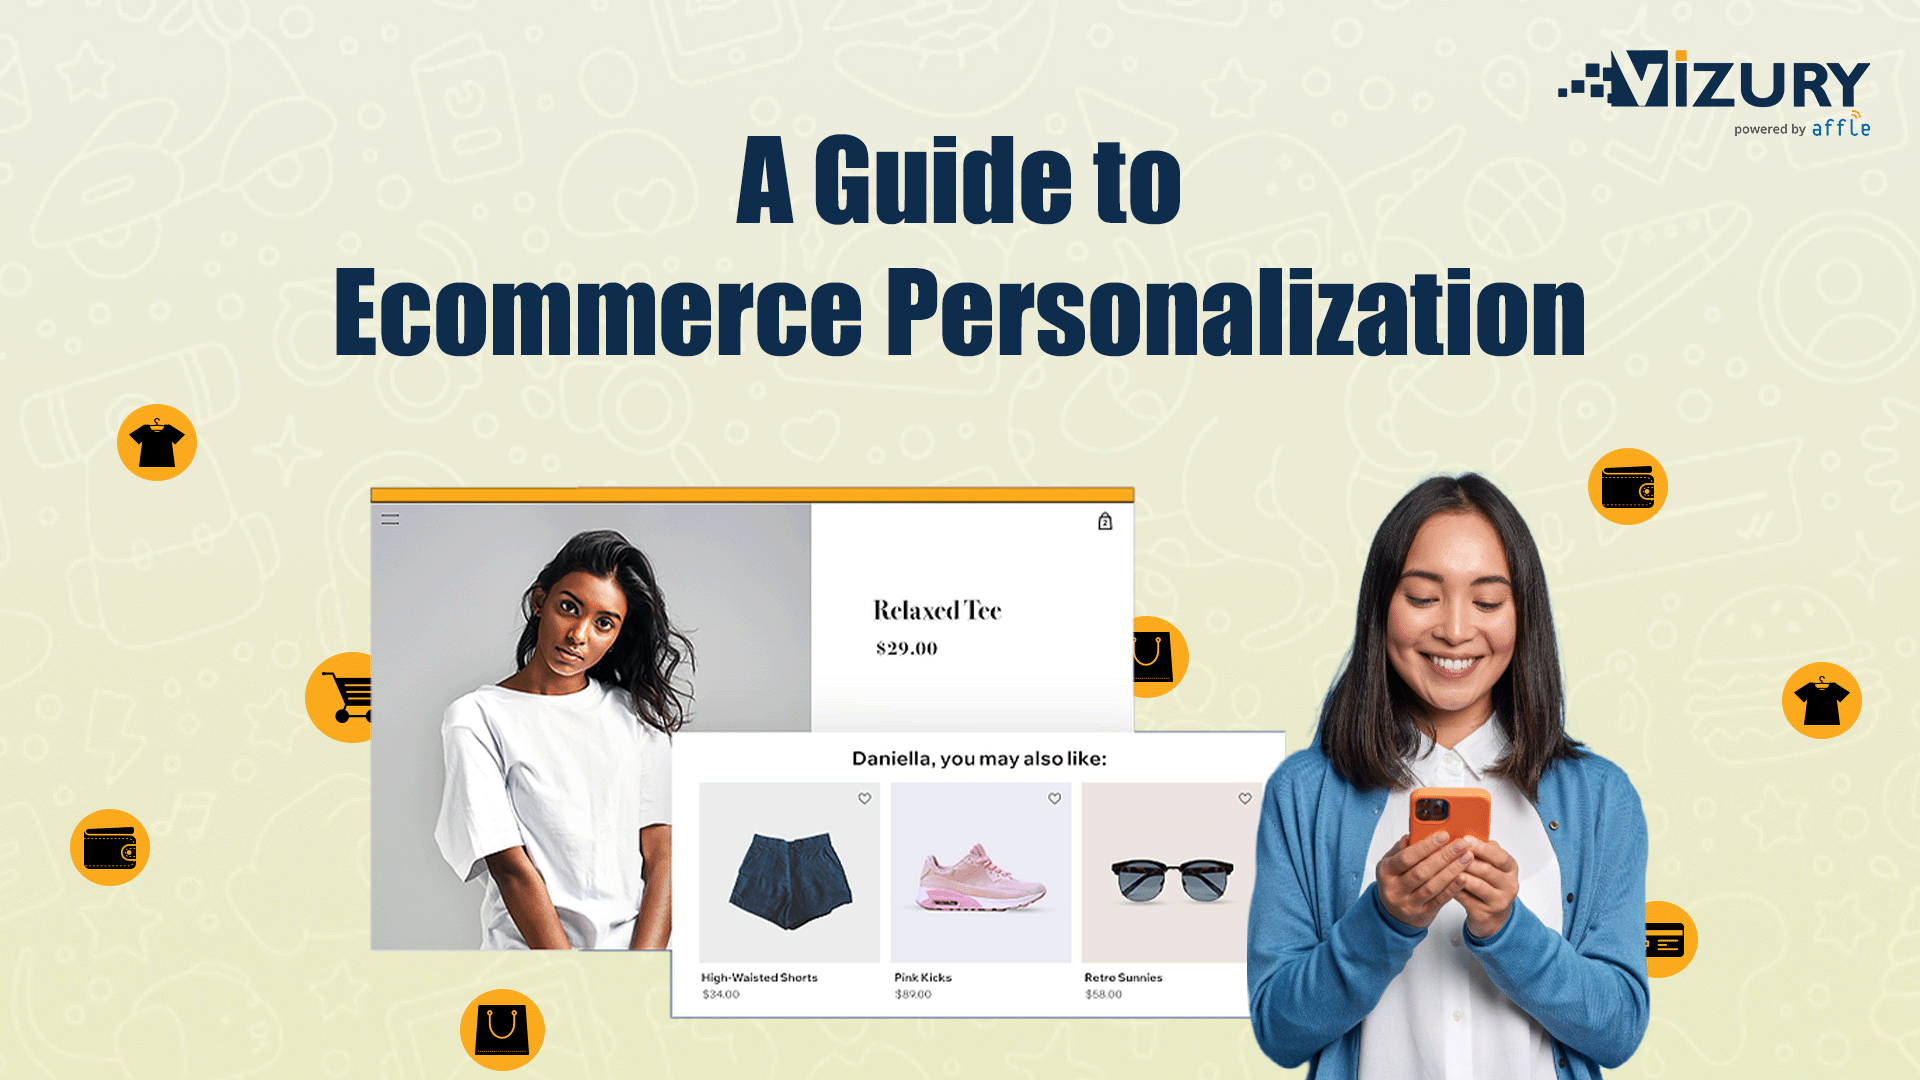 A Guide to eCommerce Personalization